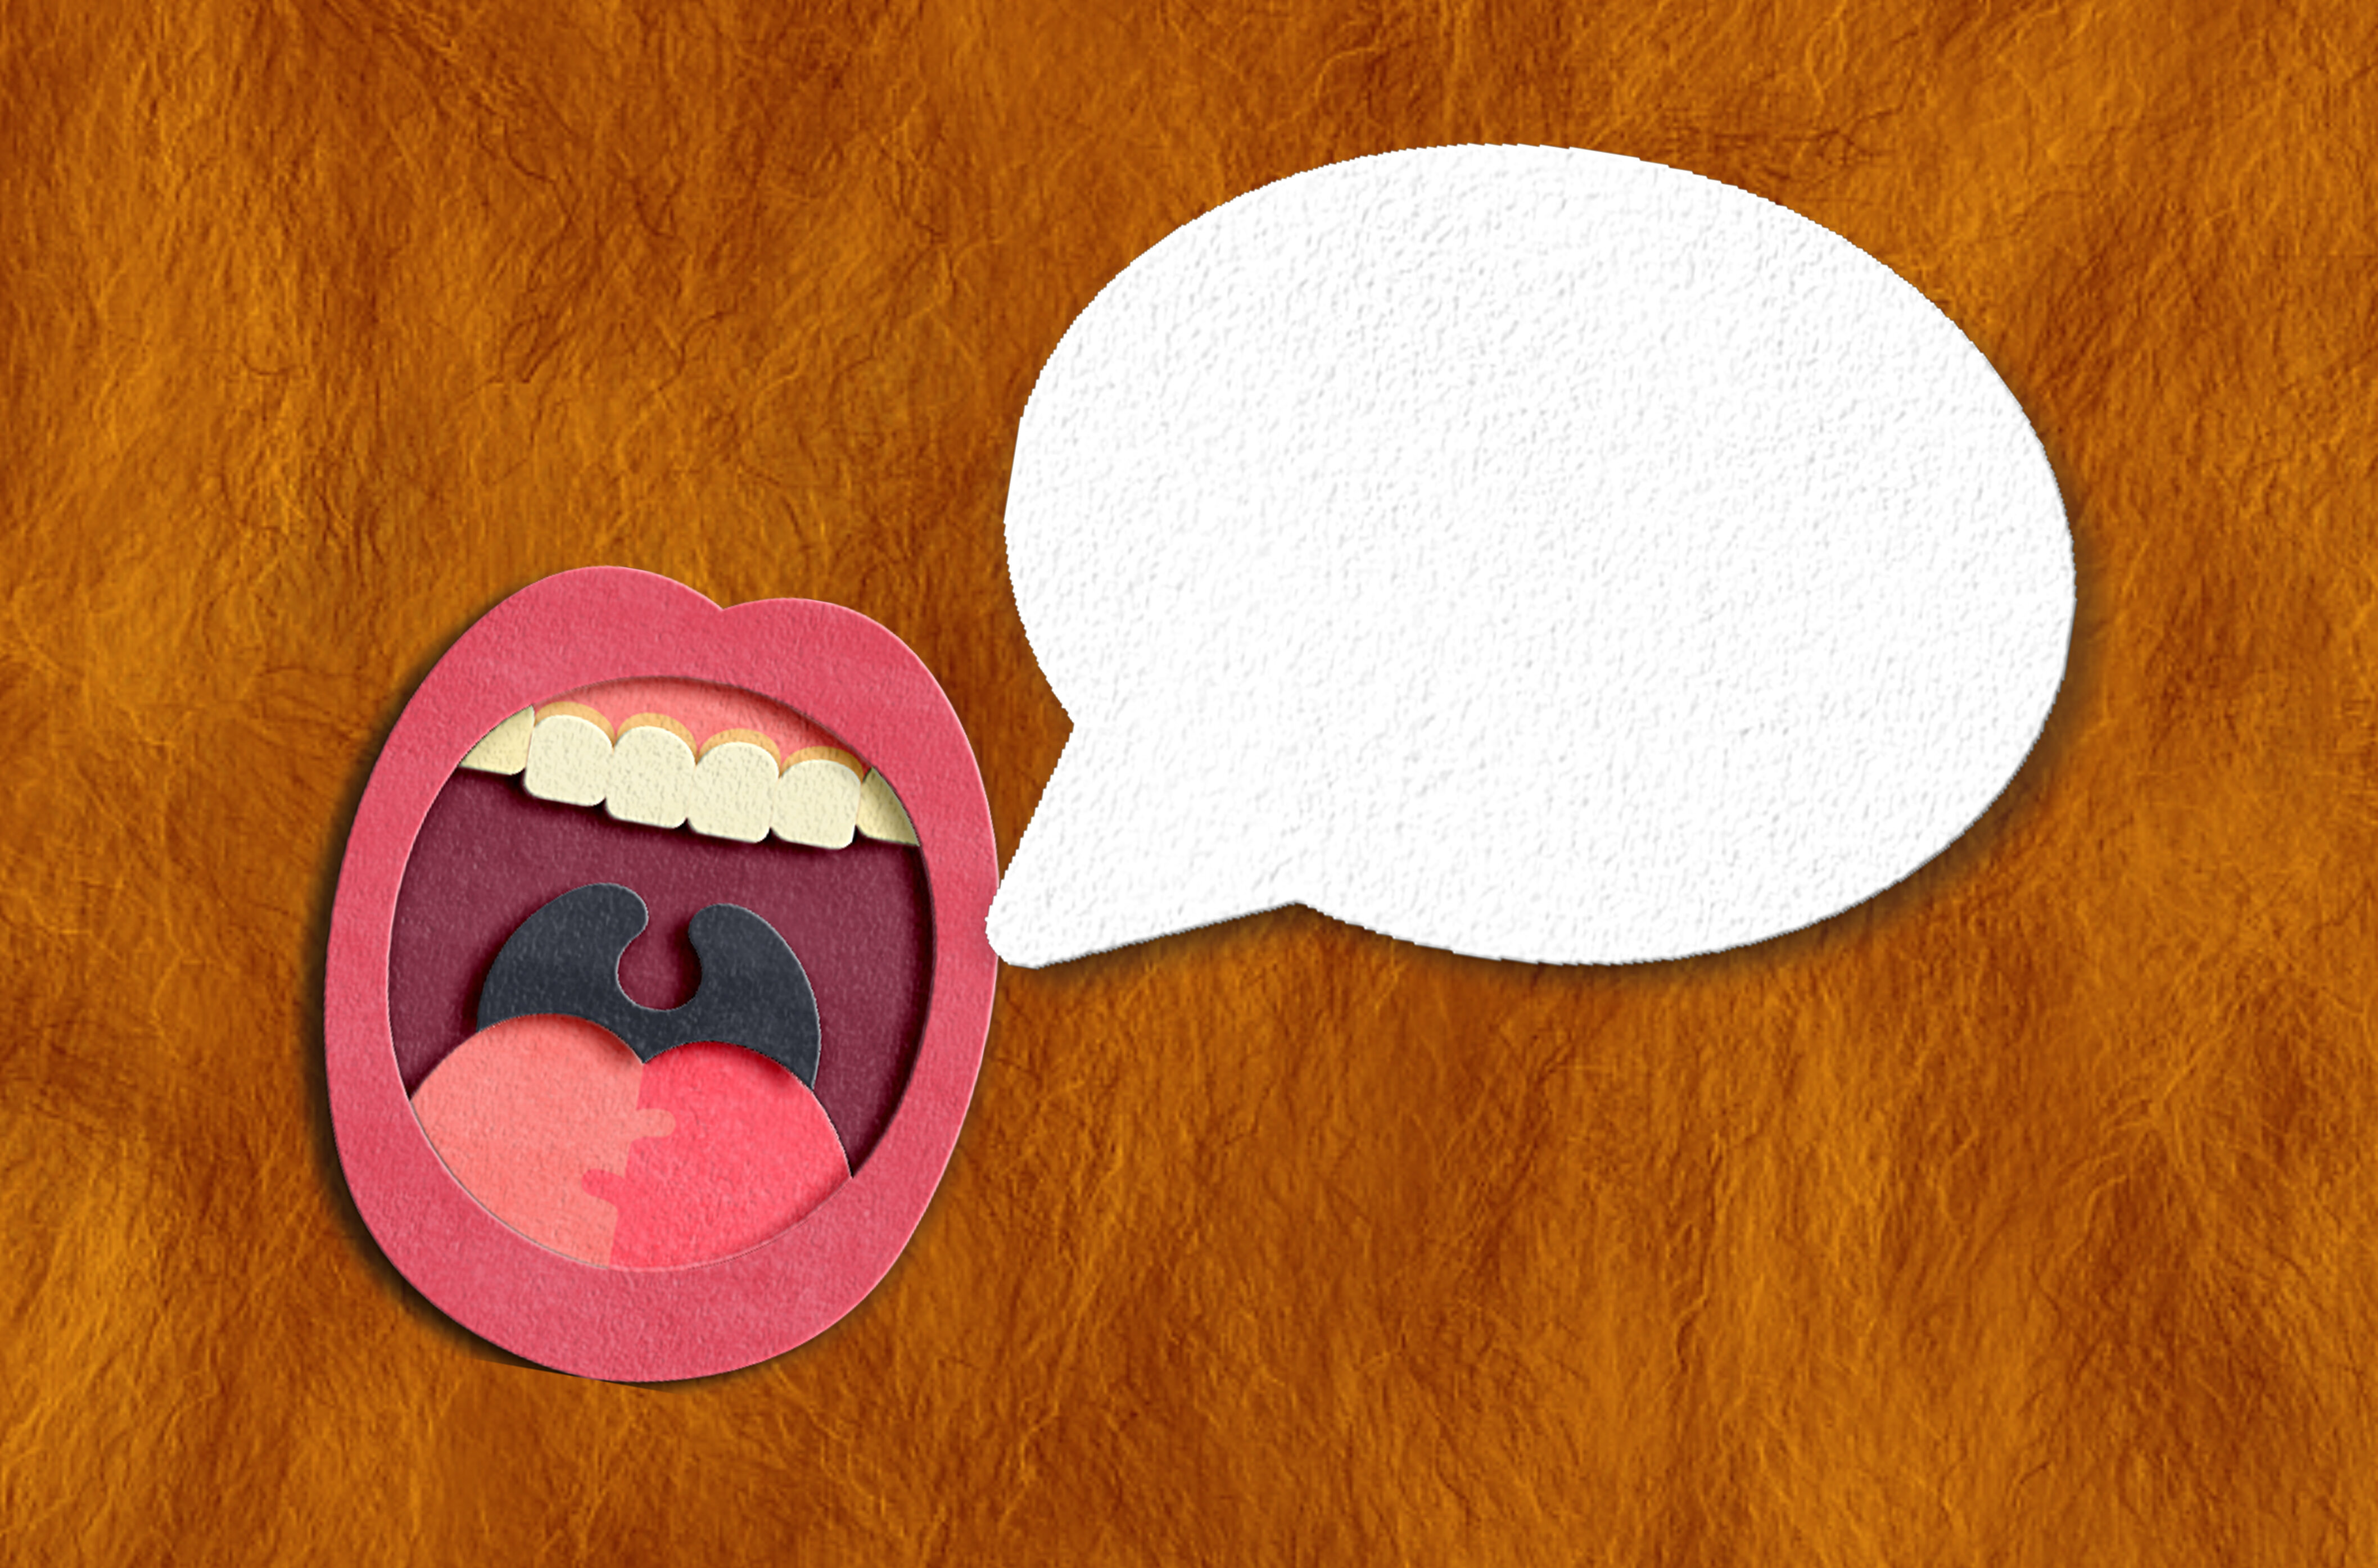 Collage of a stylized mouth with various shapes and a blank speech bubble on a textured background